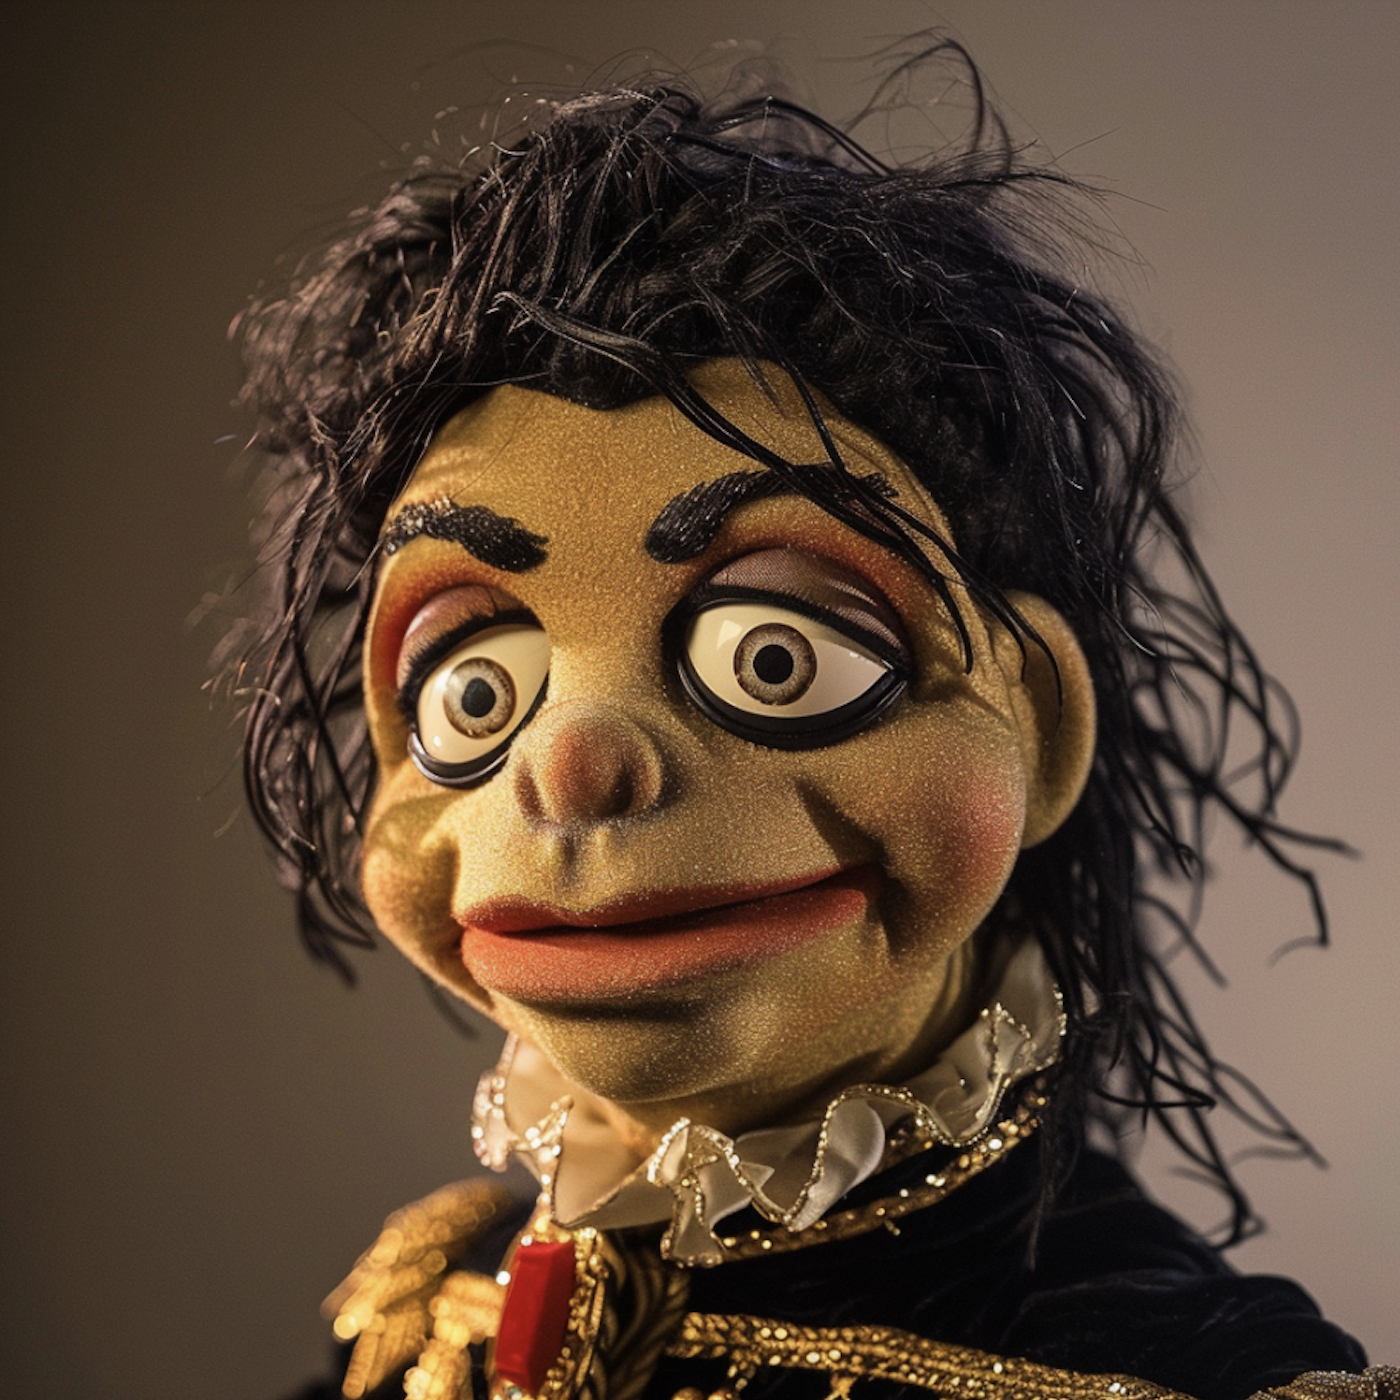 Close-up of a puppet with large, expressive eyes and thin, tousled hair, wearing a ruffled collar and ornate costume